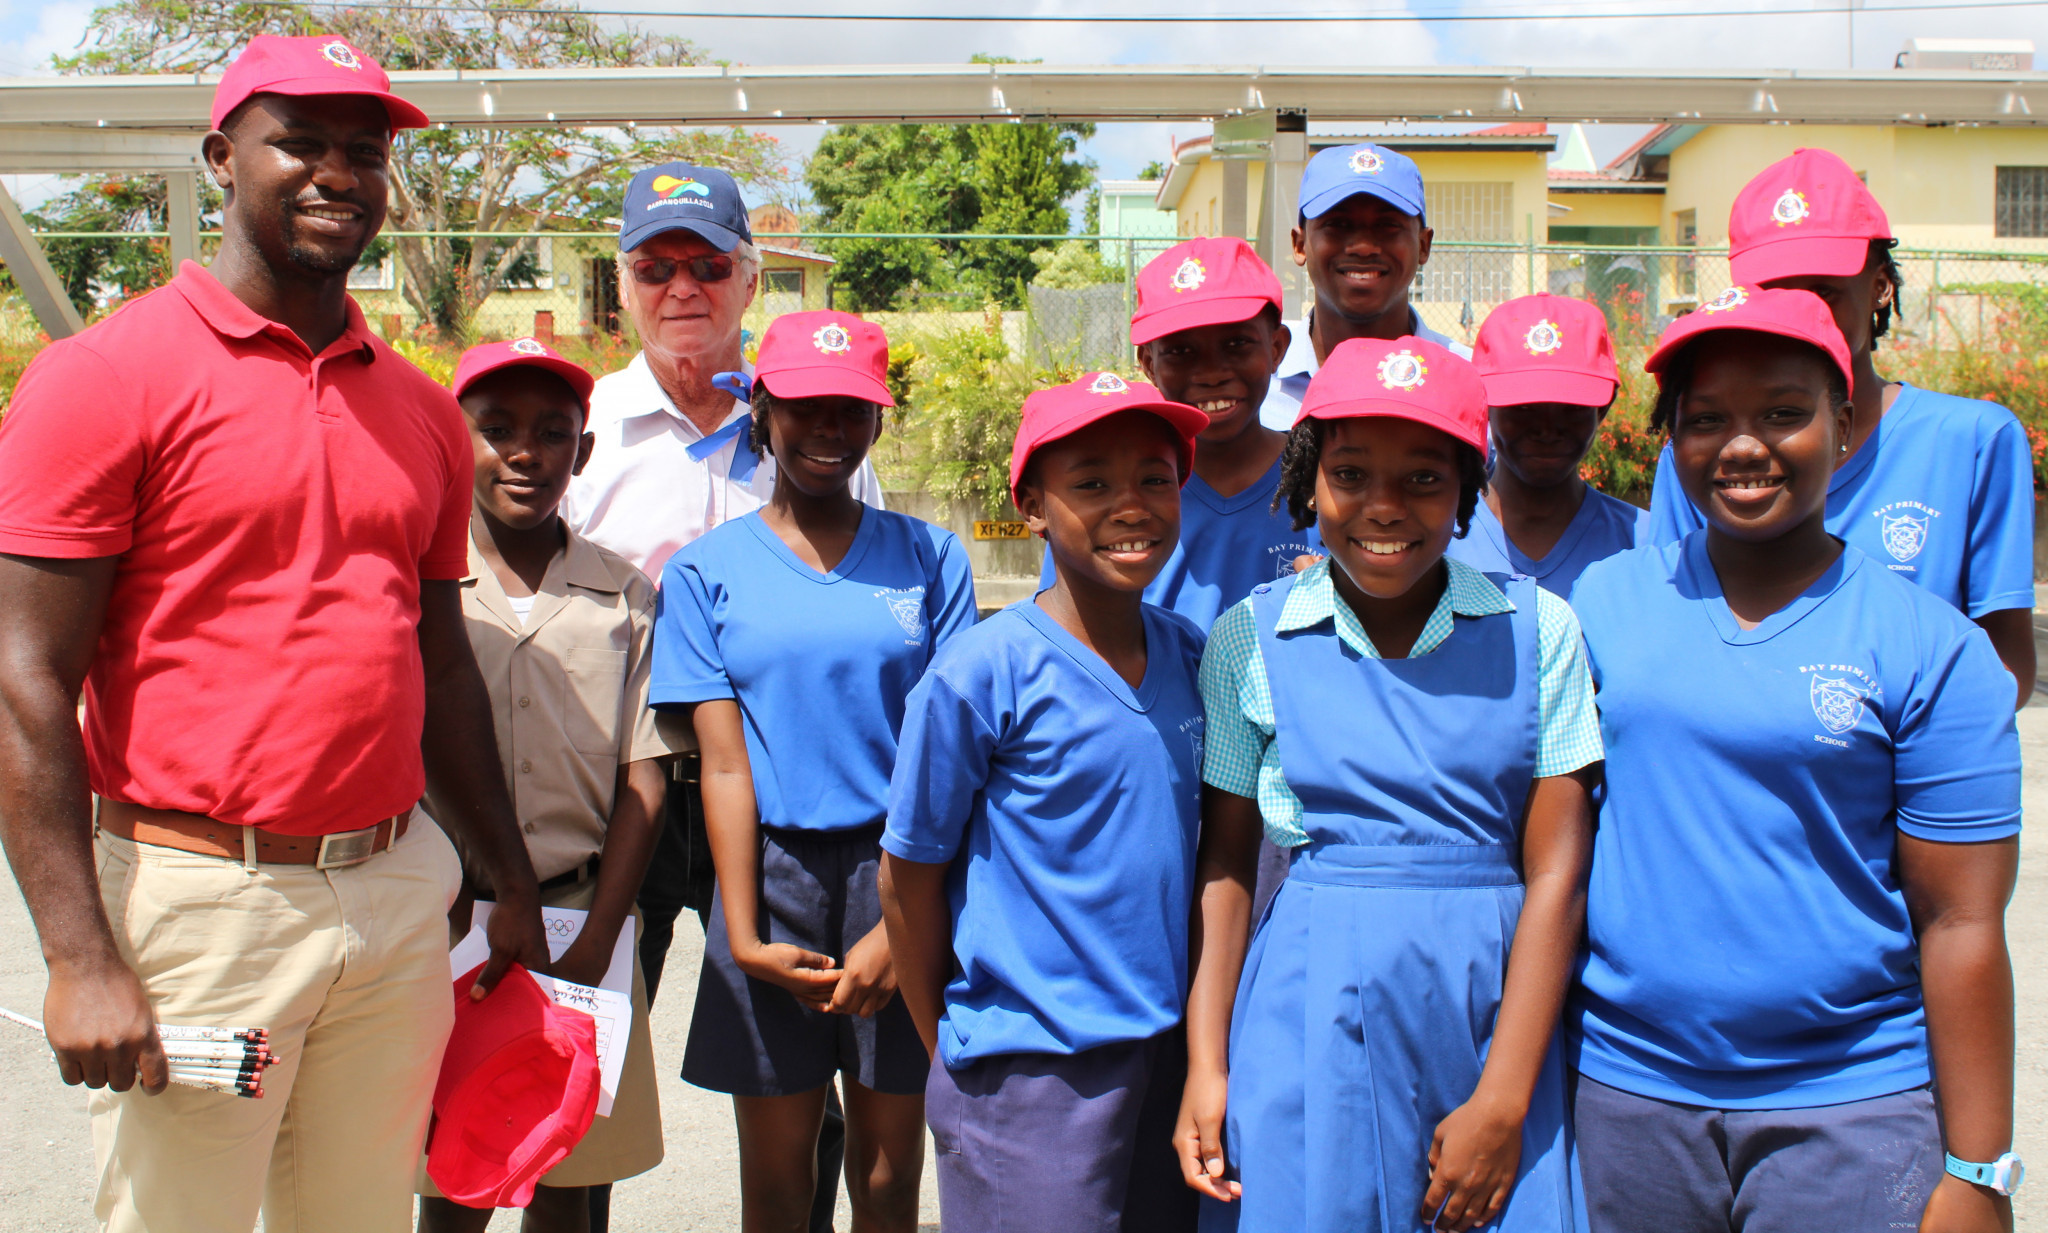 The Barbados Olympic Association has held a primary school event to celebrate Olympic Day ©BOA